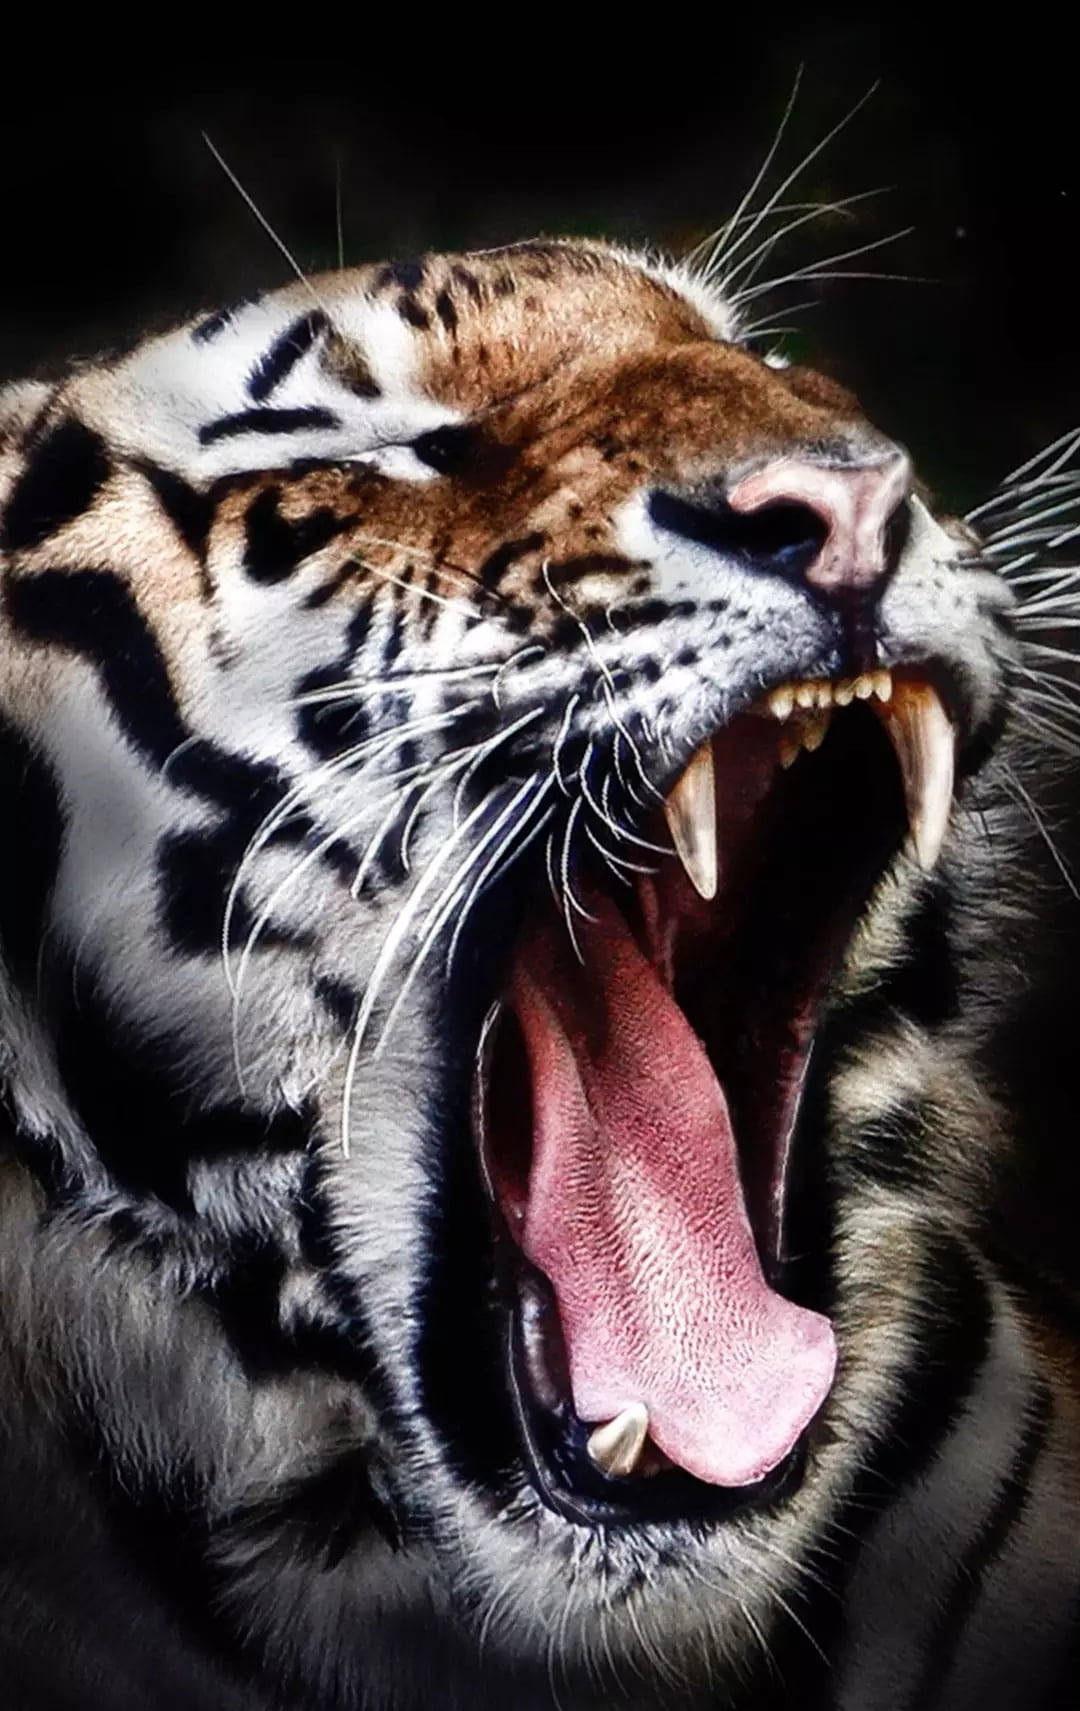 An Angry Roaring Black Tiger